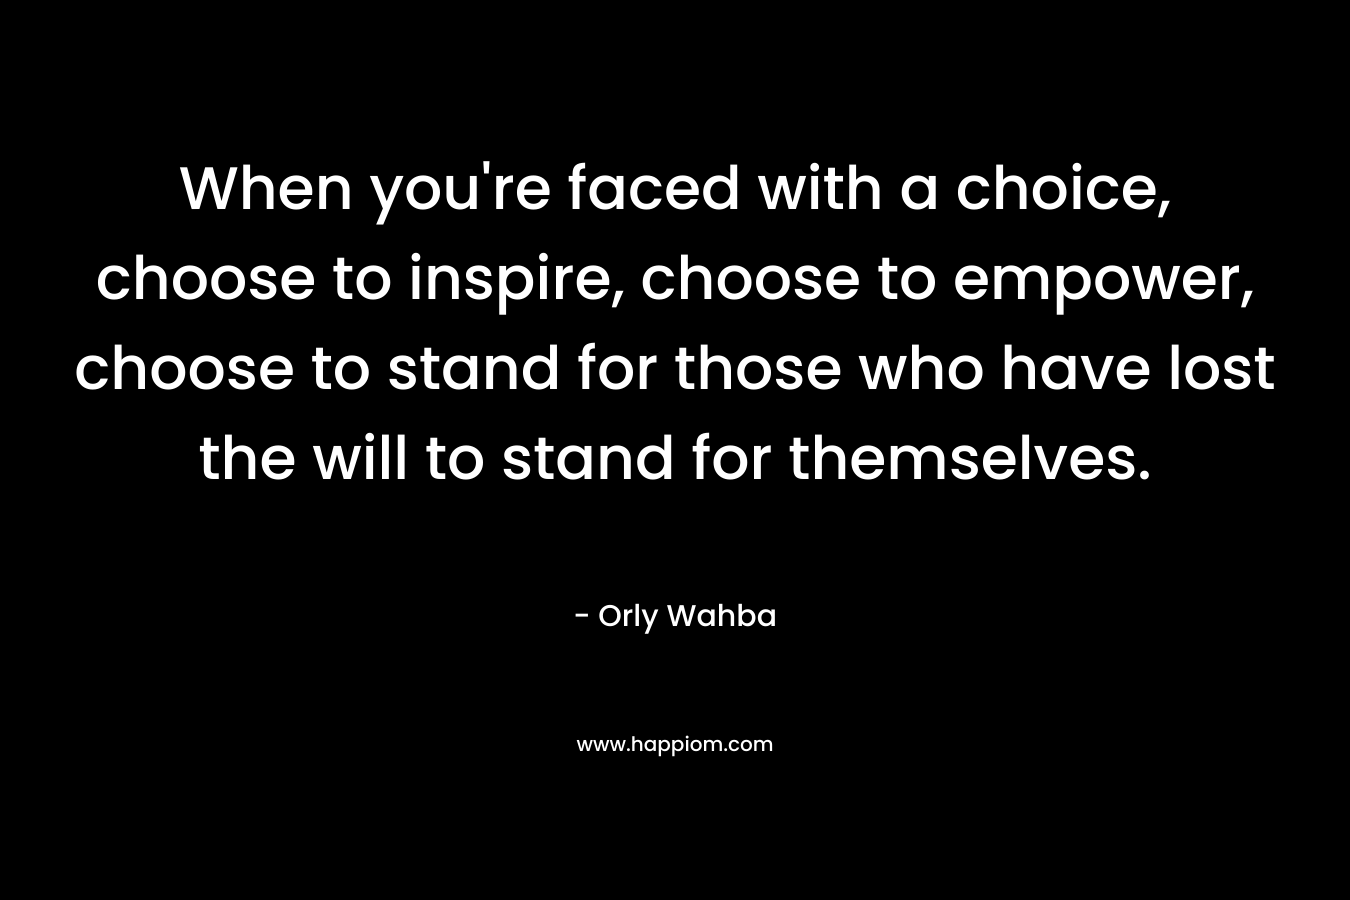 When you're faced with a choice, choose to inspire, choose to empower, choose to stand for those who have lost the will to stand for themselves.